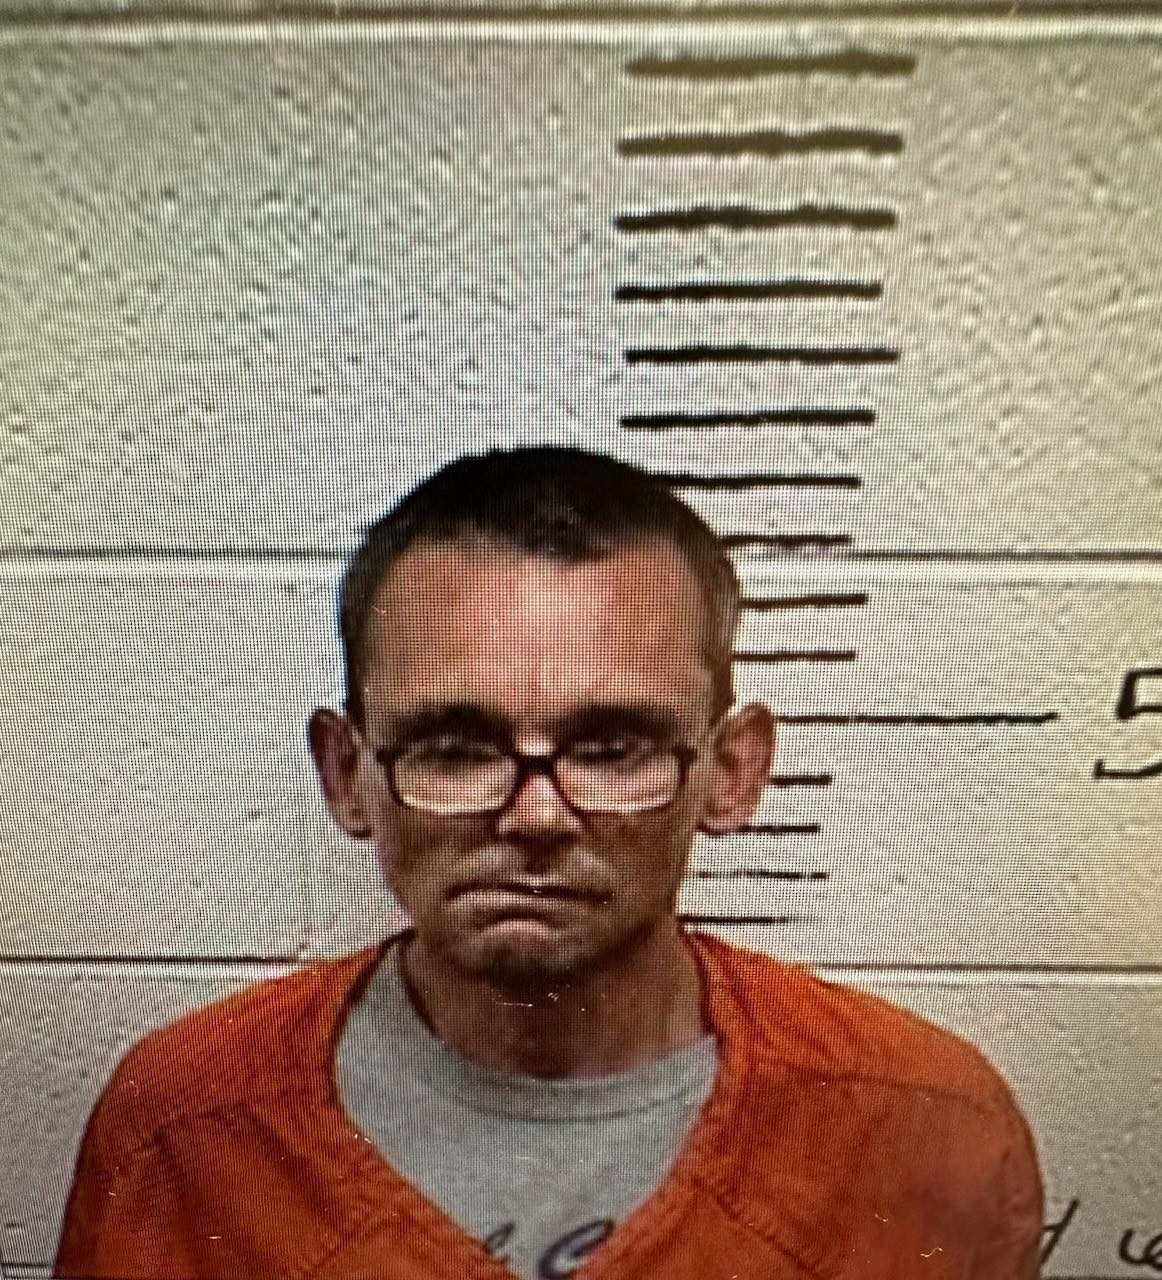 Dyer County escapee located outside Dollar General WBBJ TV